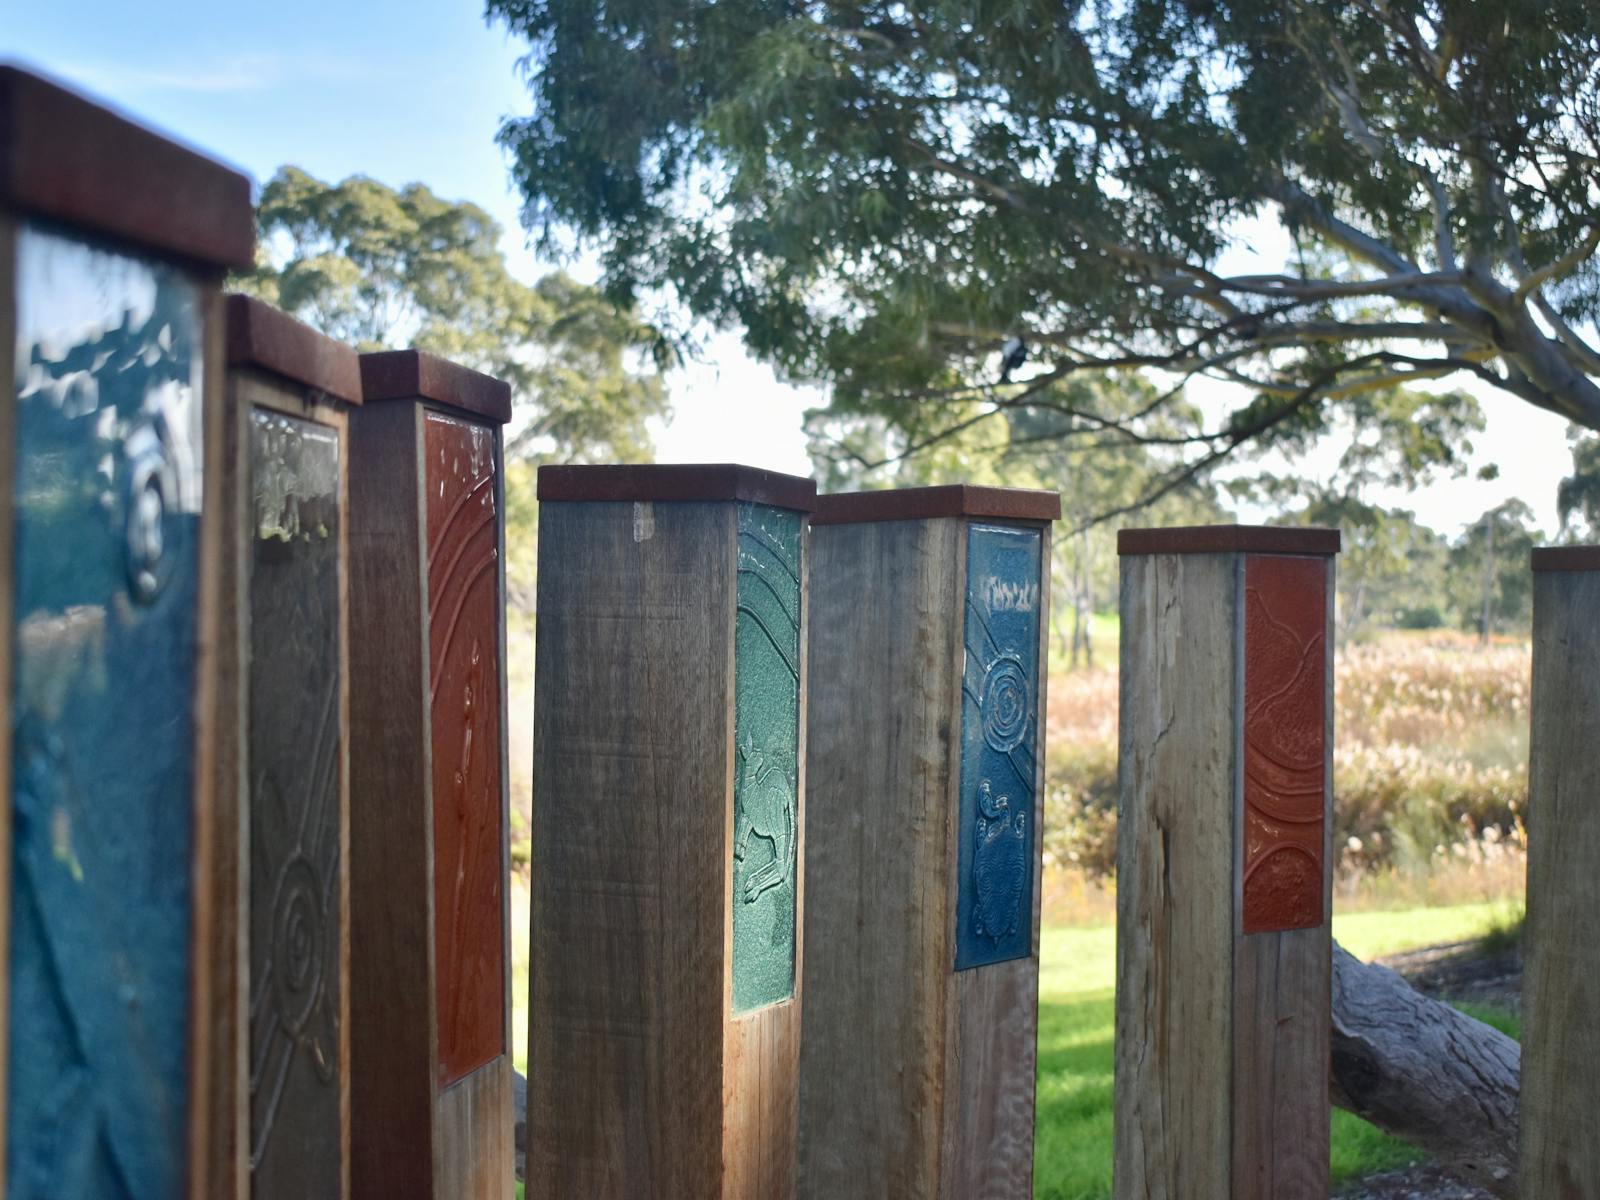 Seven Wathaurong Glass-inlaid wooden bollards. A nod to our indigenous land owners.